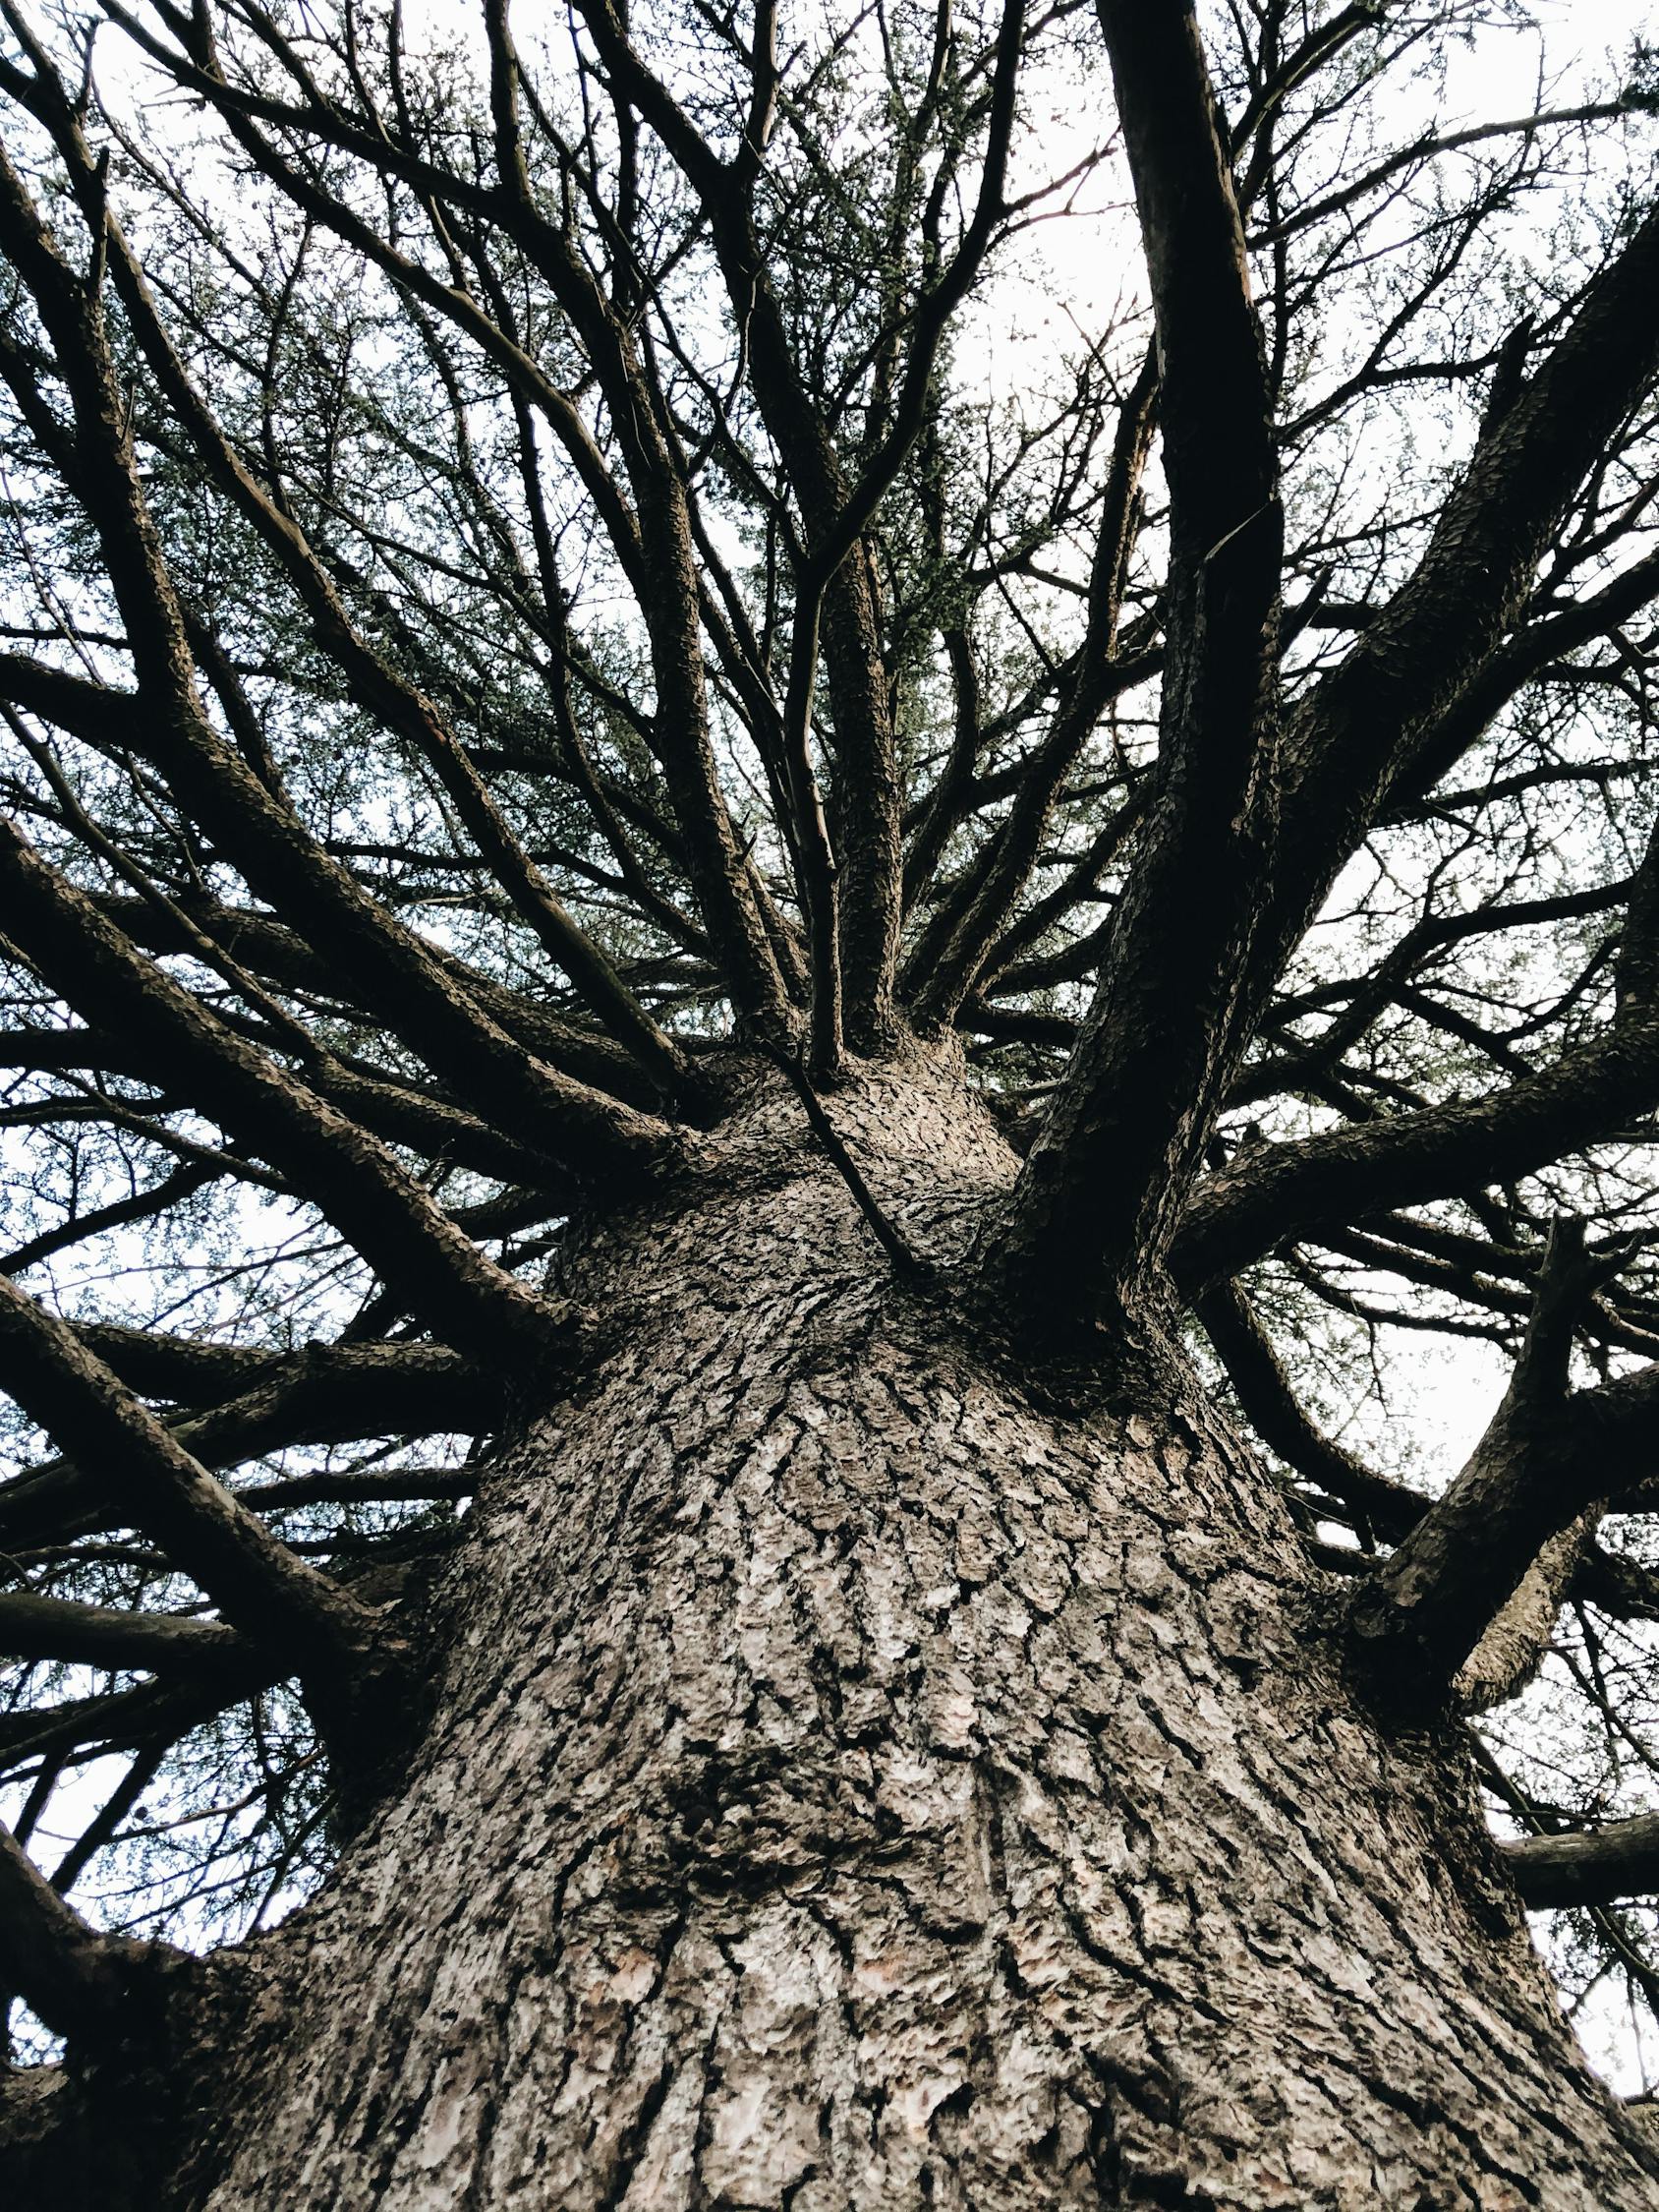 Tall Leafless Tree Growing In Park · Free Stock Photo